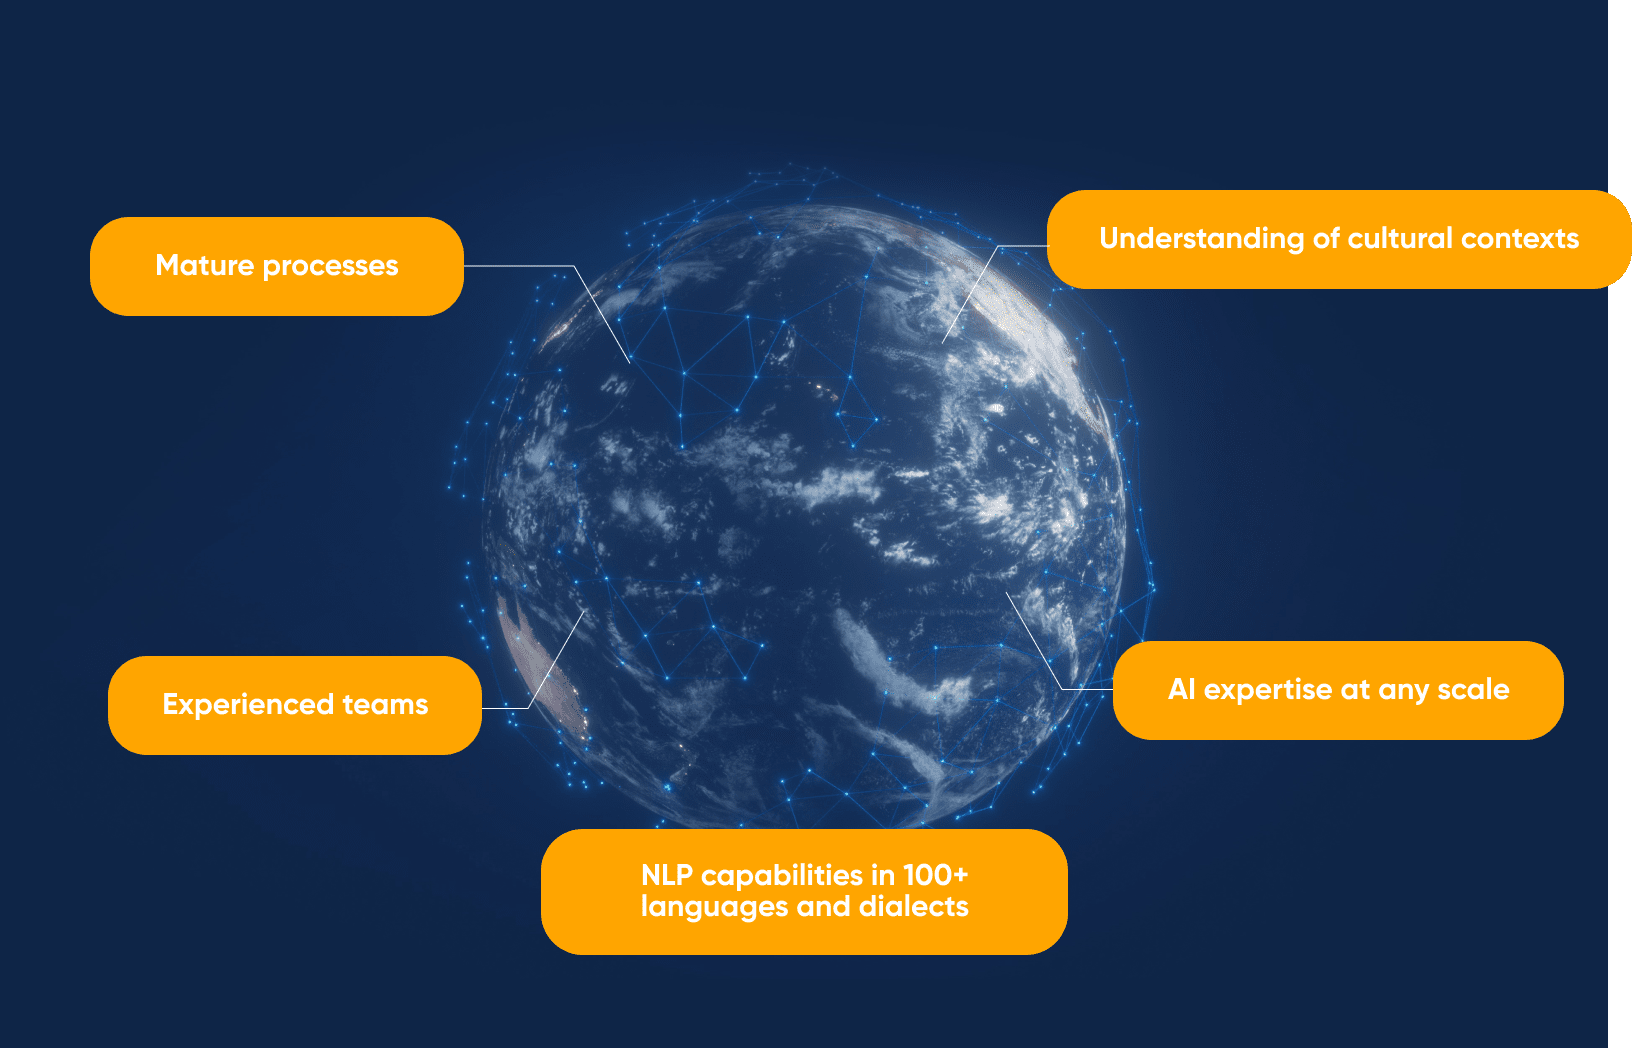 The image illustrates the highlights of the geospatial AI services offered by Opputure.